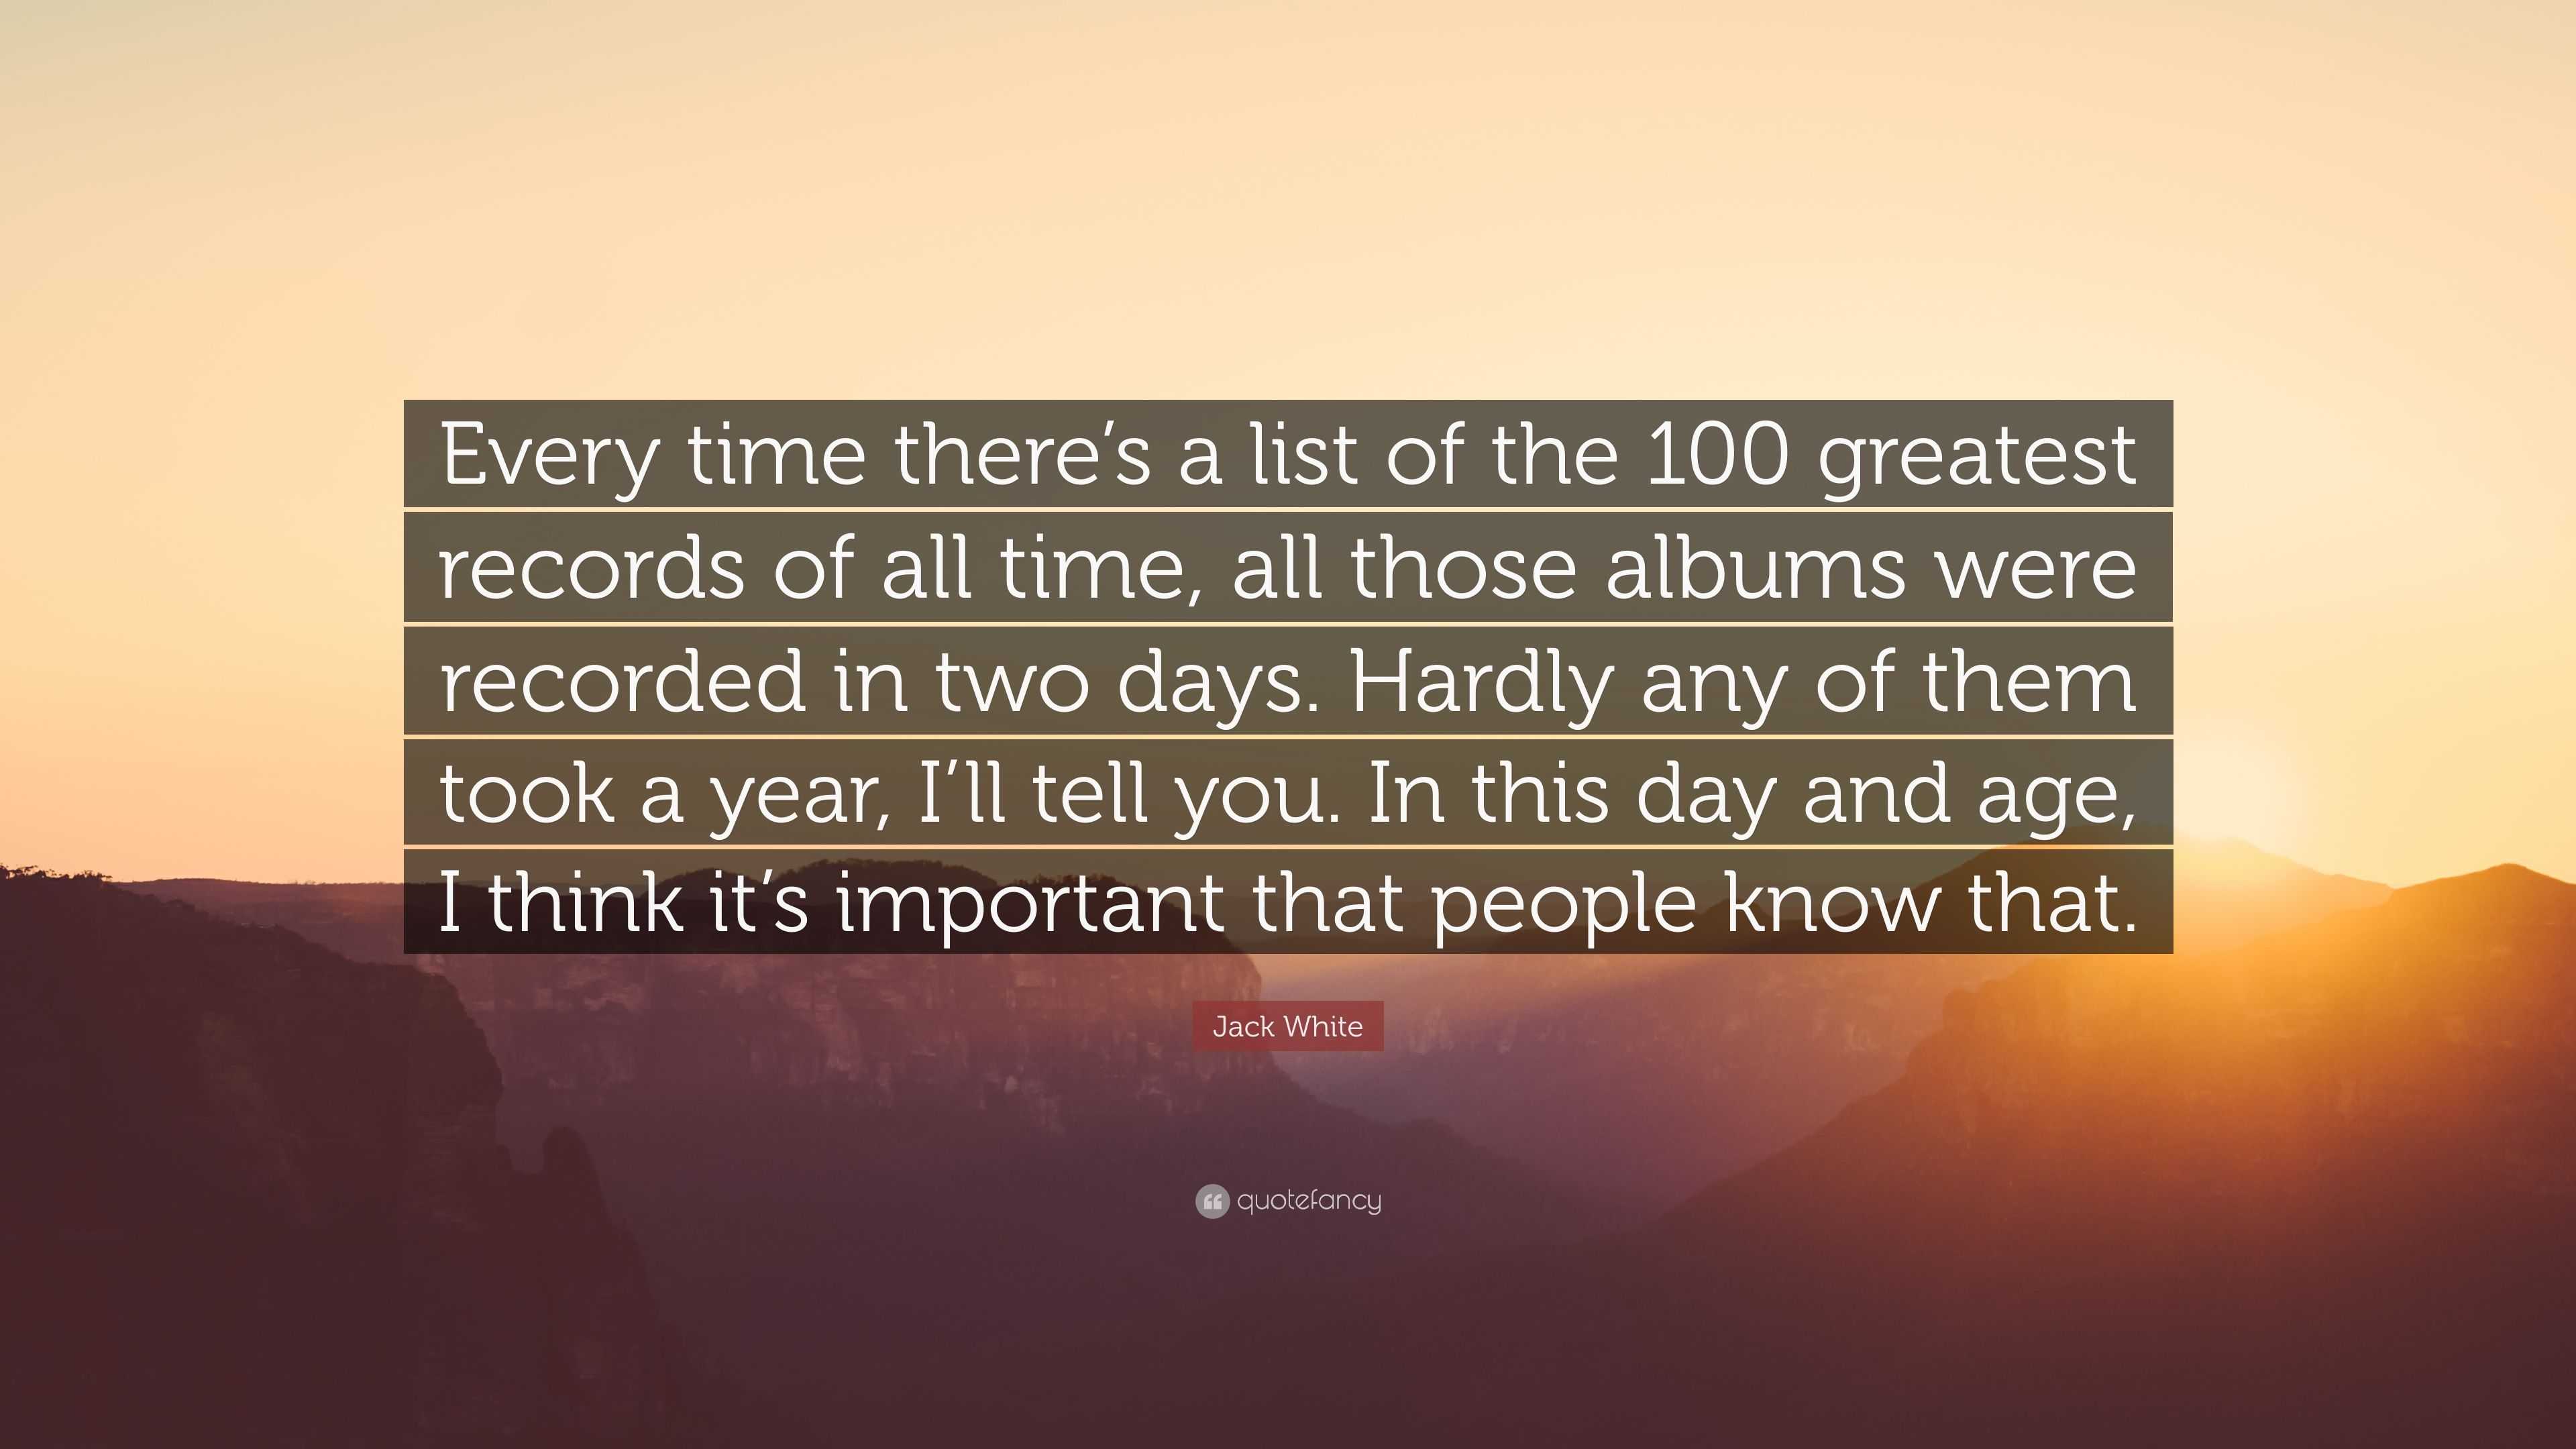 Jack White Quote: “Every time there's a list of the 100 greatest